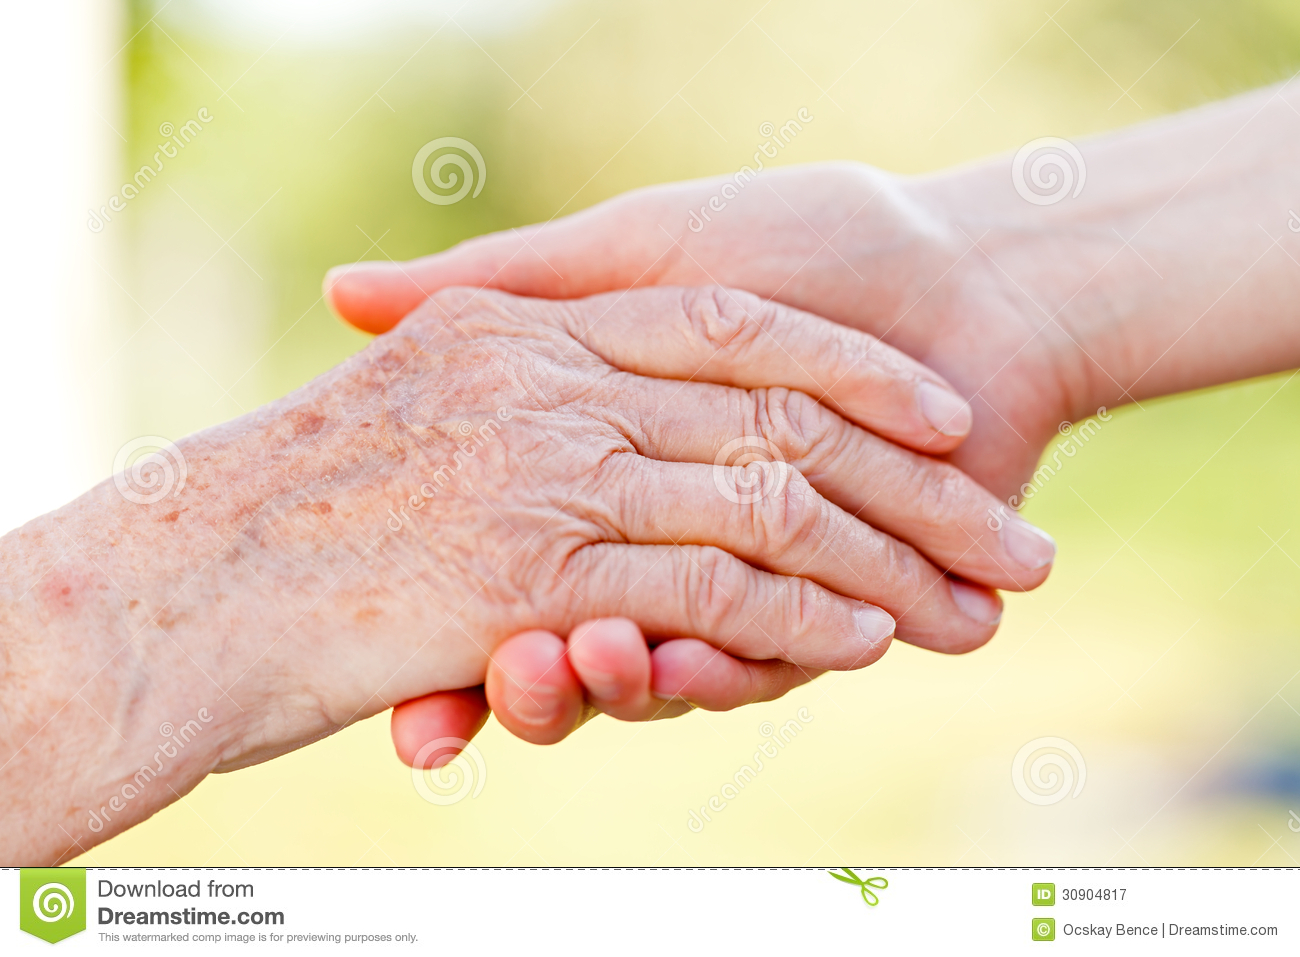 Helping Hands Royalty Free Stock Photography   Image  30904817